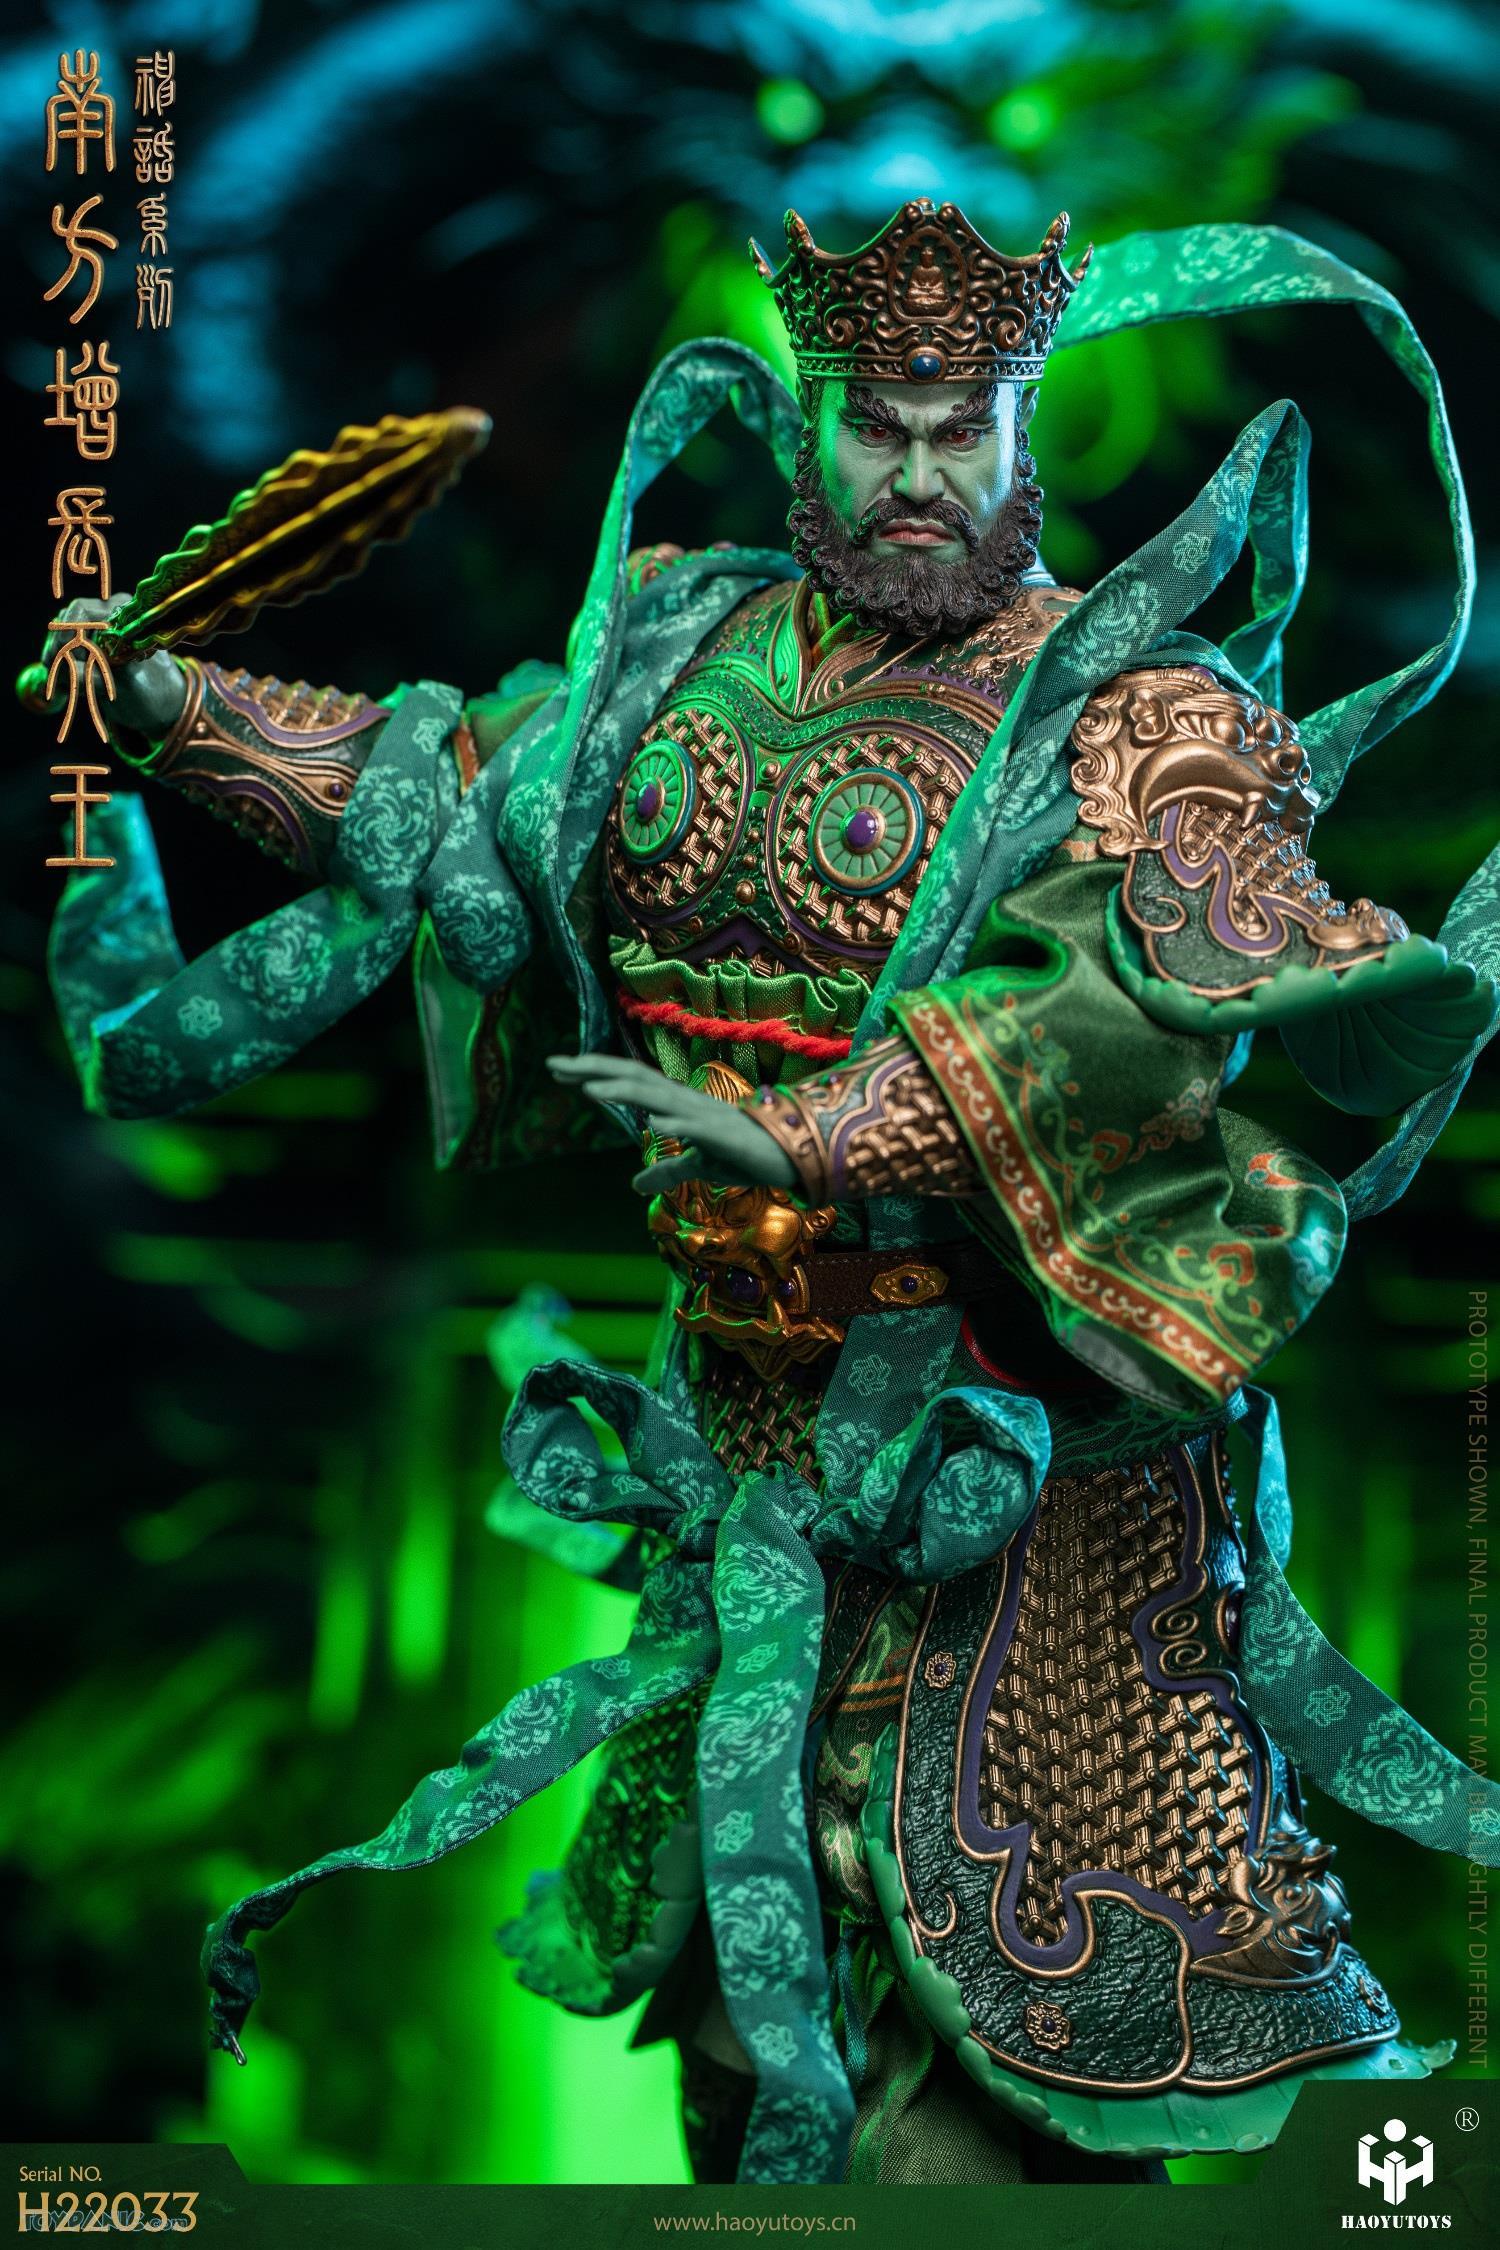 NEW PRODUCT: HaoYuToys 1/6 Myth Series Southern Growth King 212202451835PM_1790101